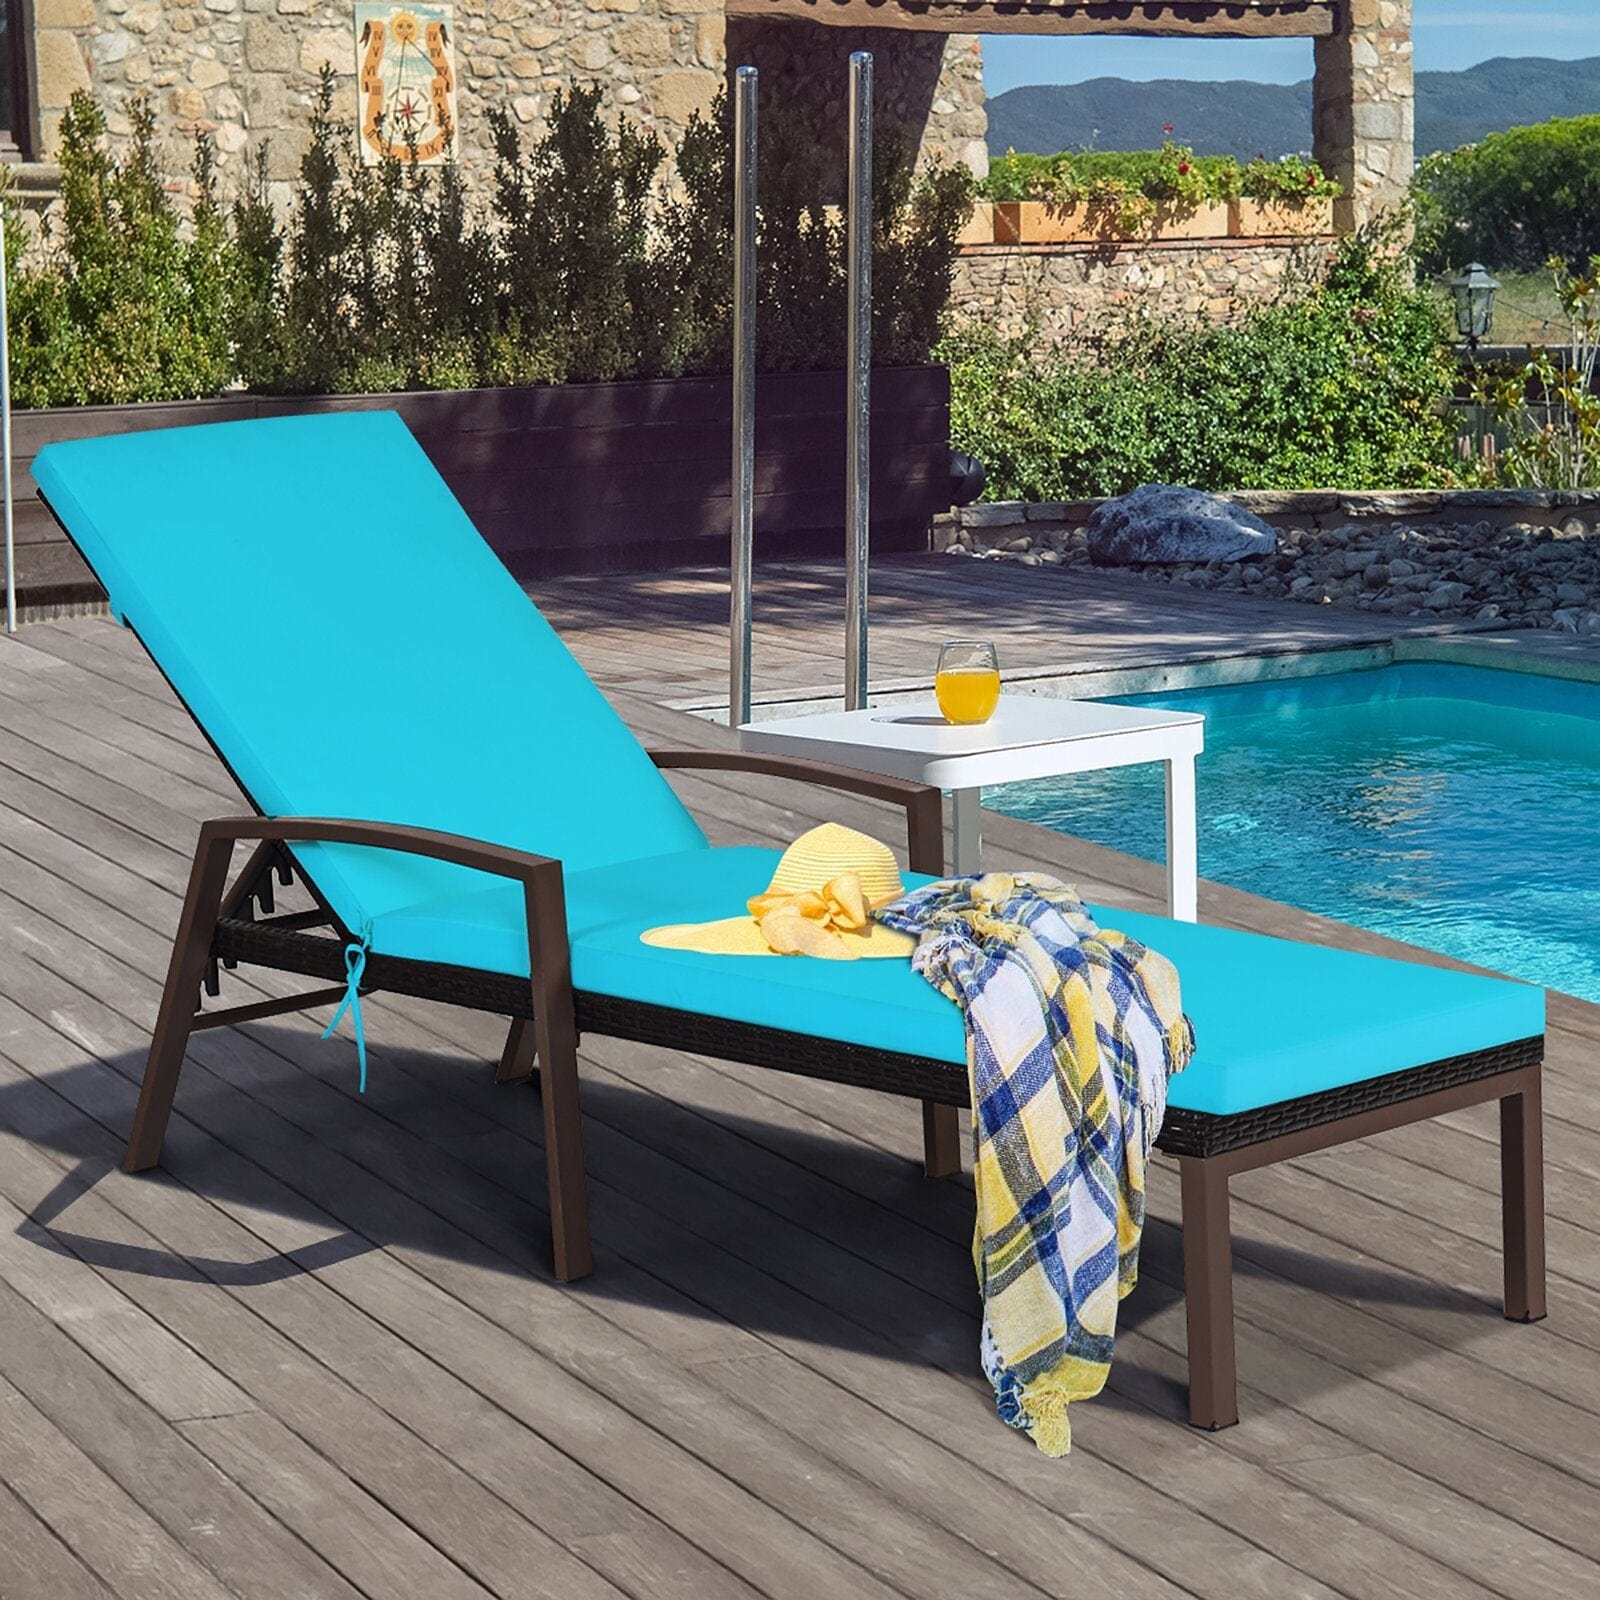 Dreamline Outdoor Furniture Poolside Lounger With Cushions (Dark Brown)